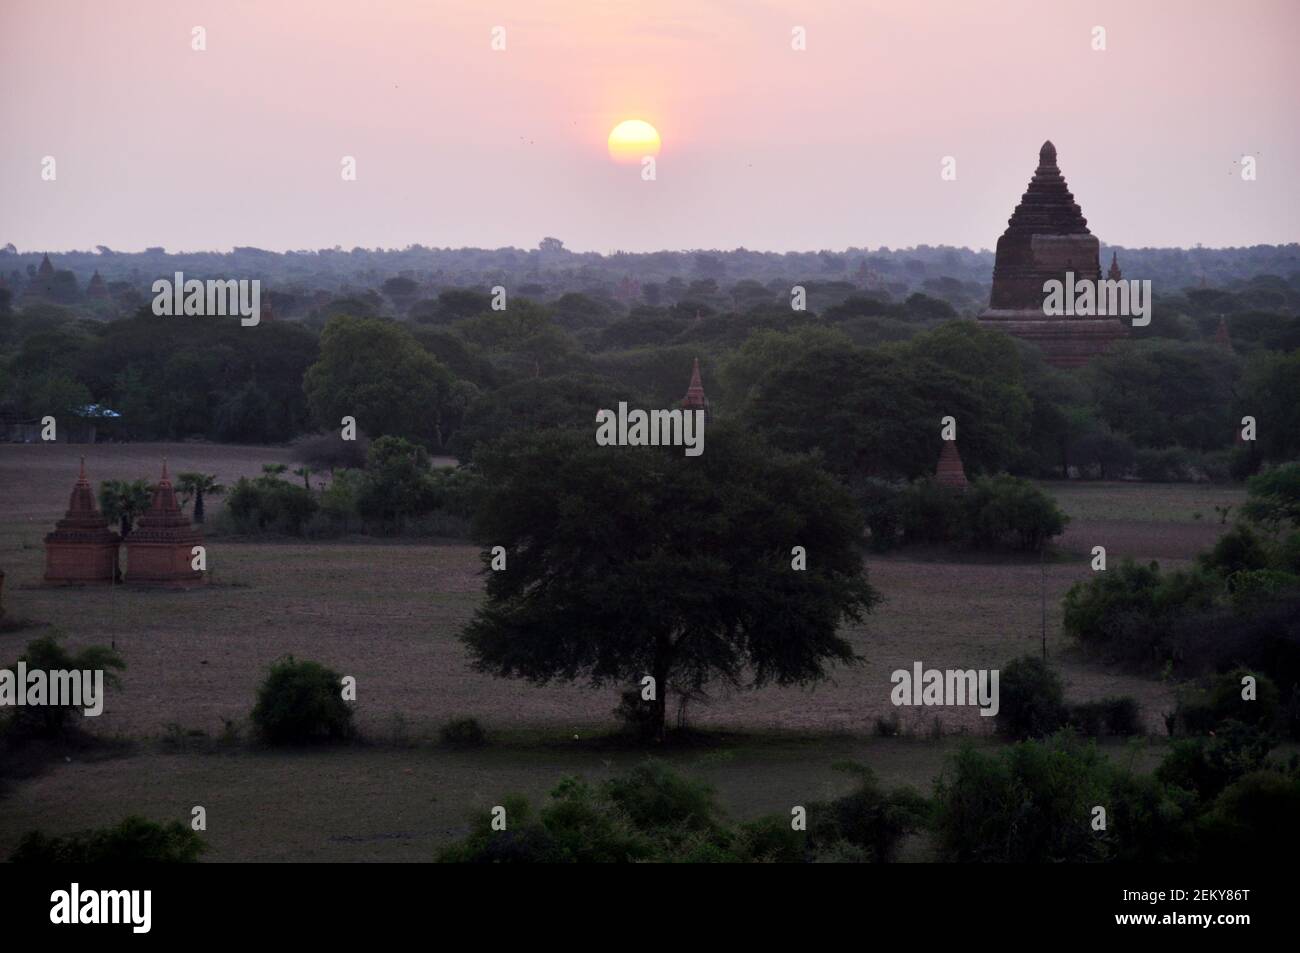 View landscape and ruins cityscape World Heritage Site with over 2000 pagodas and temples look from Mingalar Zedi Pagoda or Mingalazedi paya temple at Stock Photo